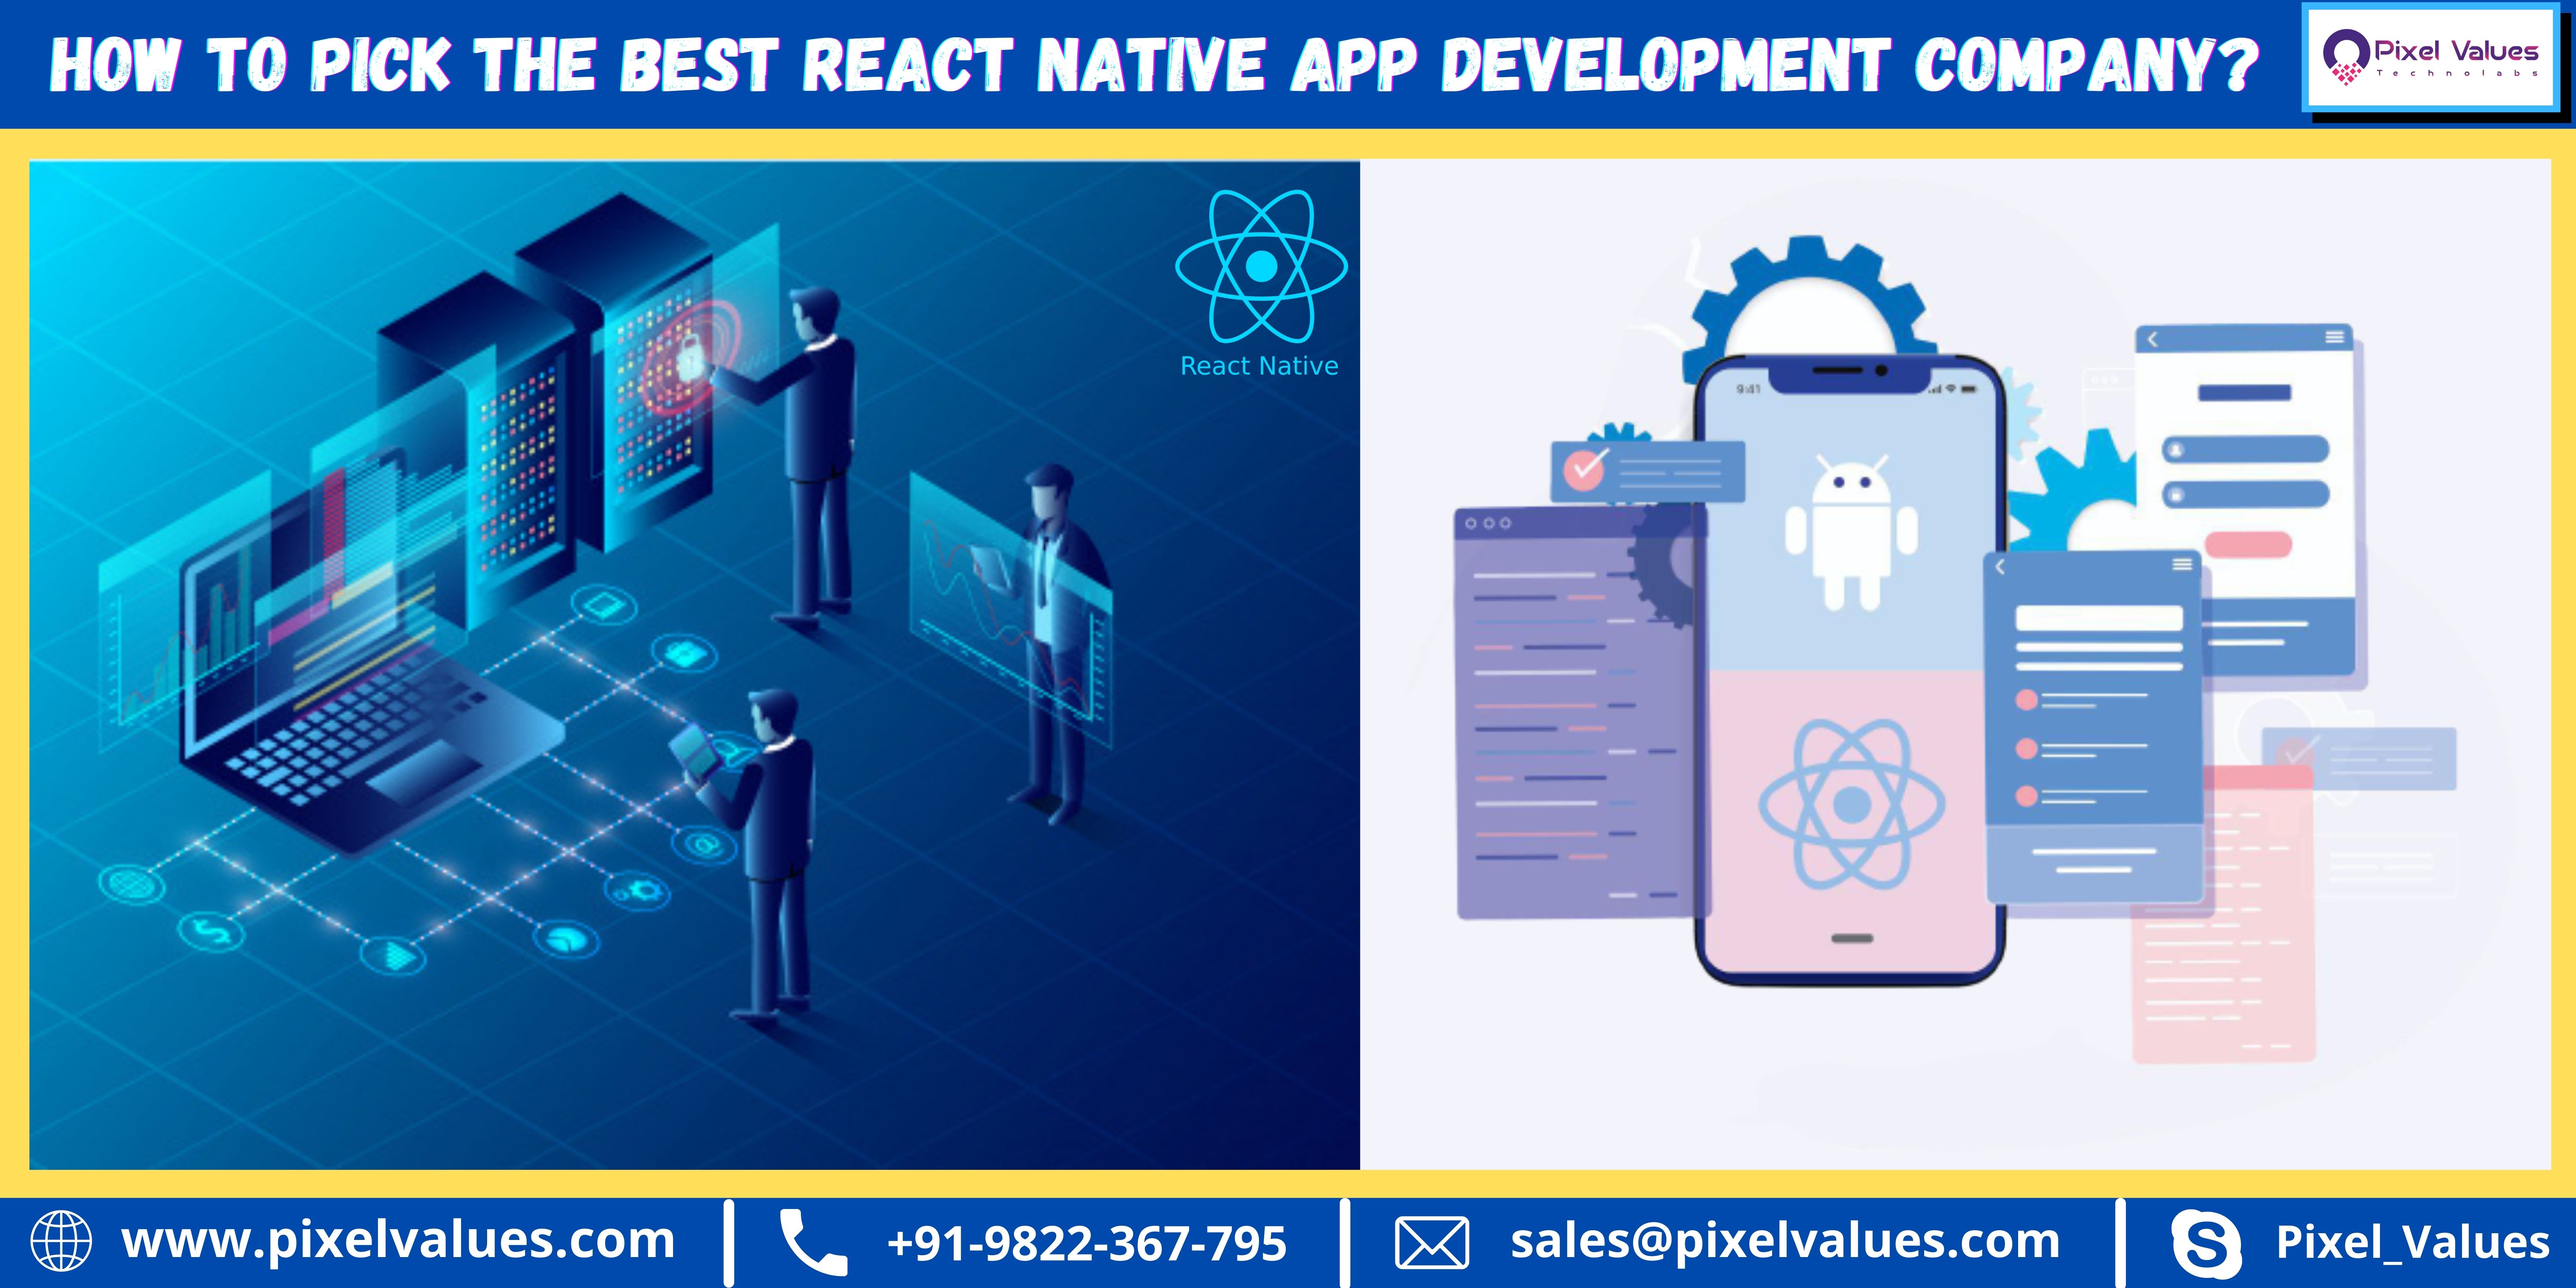 HOW TO PICK THE BEST REACT NATIVE APP DEVELOPMENT COMPANY? \itaaans

 

React Native

(a) www.pixelvalues.com | Lt +91-9822-367-795 DK] sales@pixelvalues.com S| Pixel Values